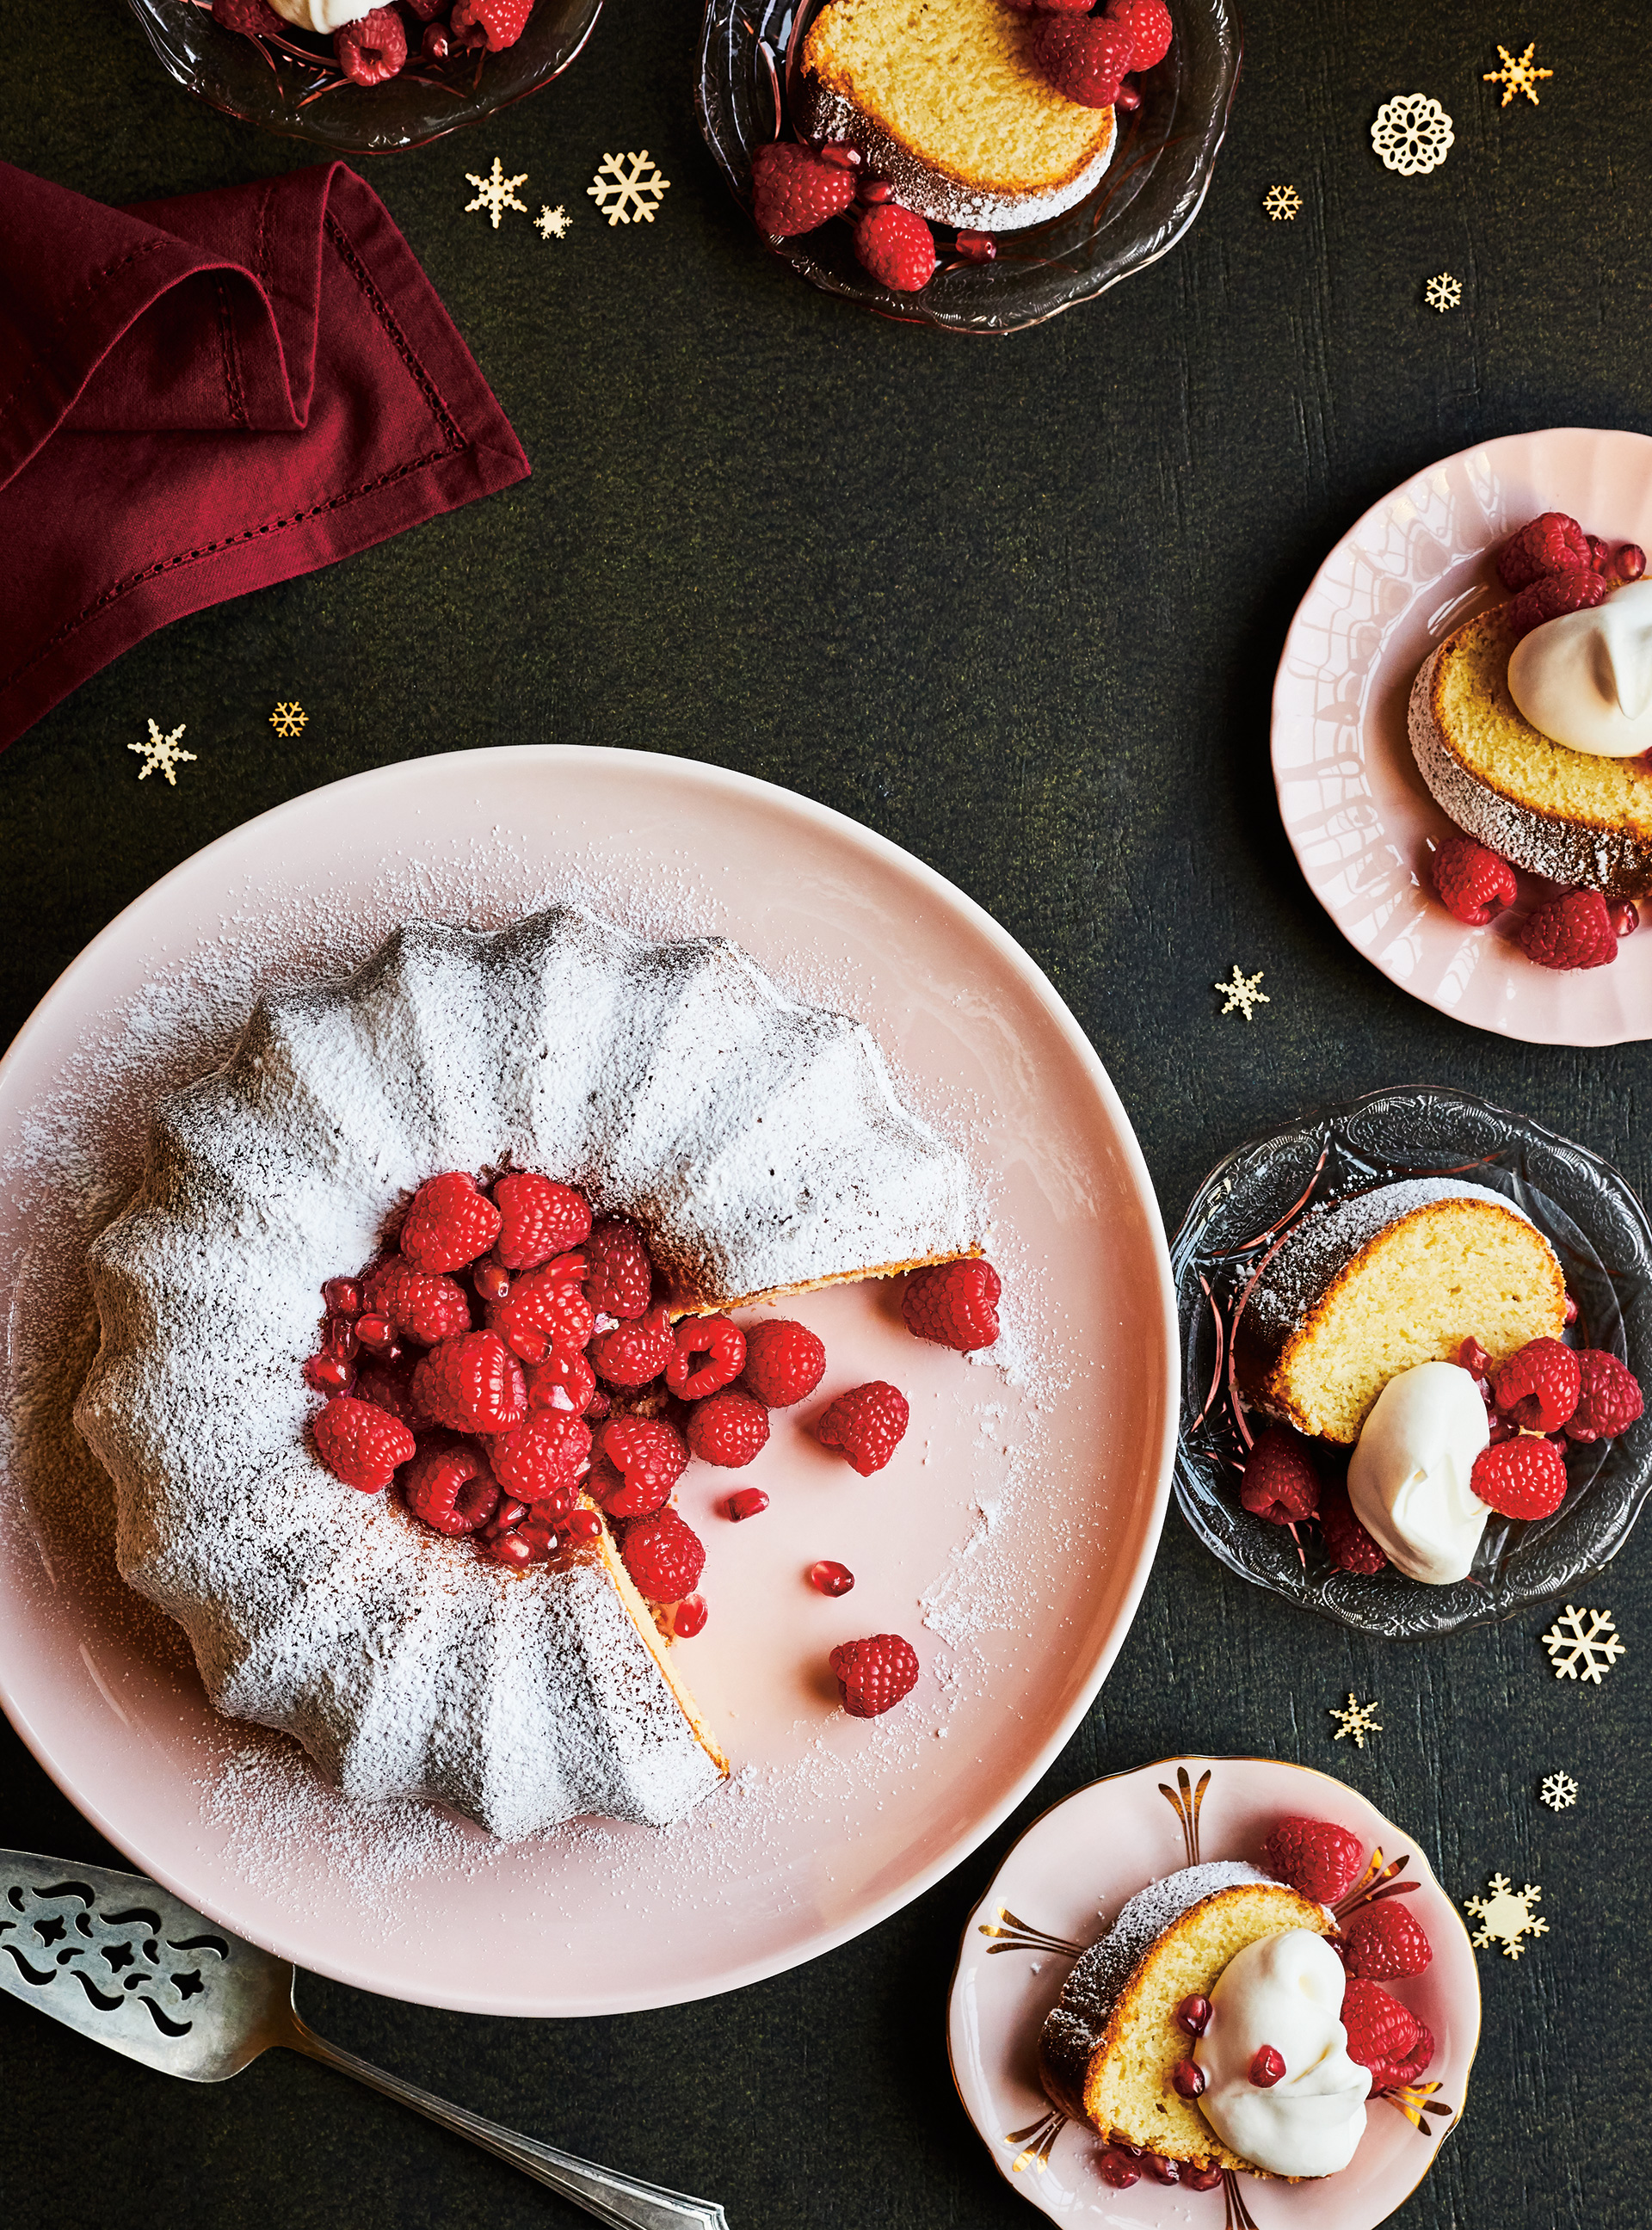 Coconut Bundt Cake with Raspberries and Pomegranate Seeds